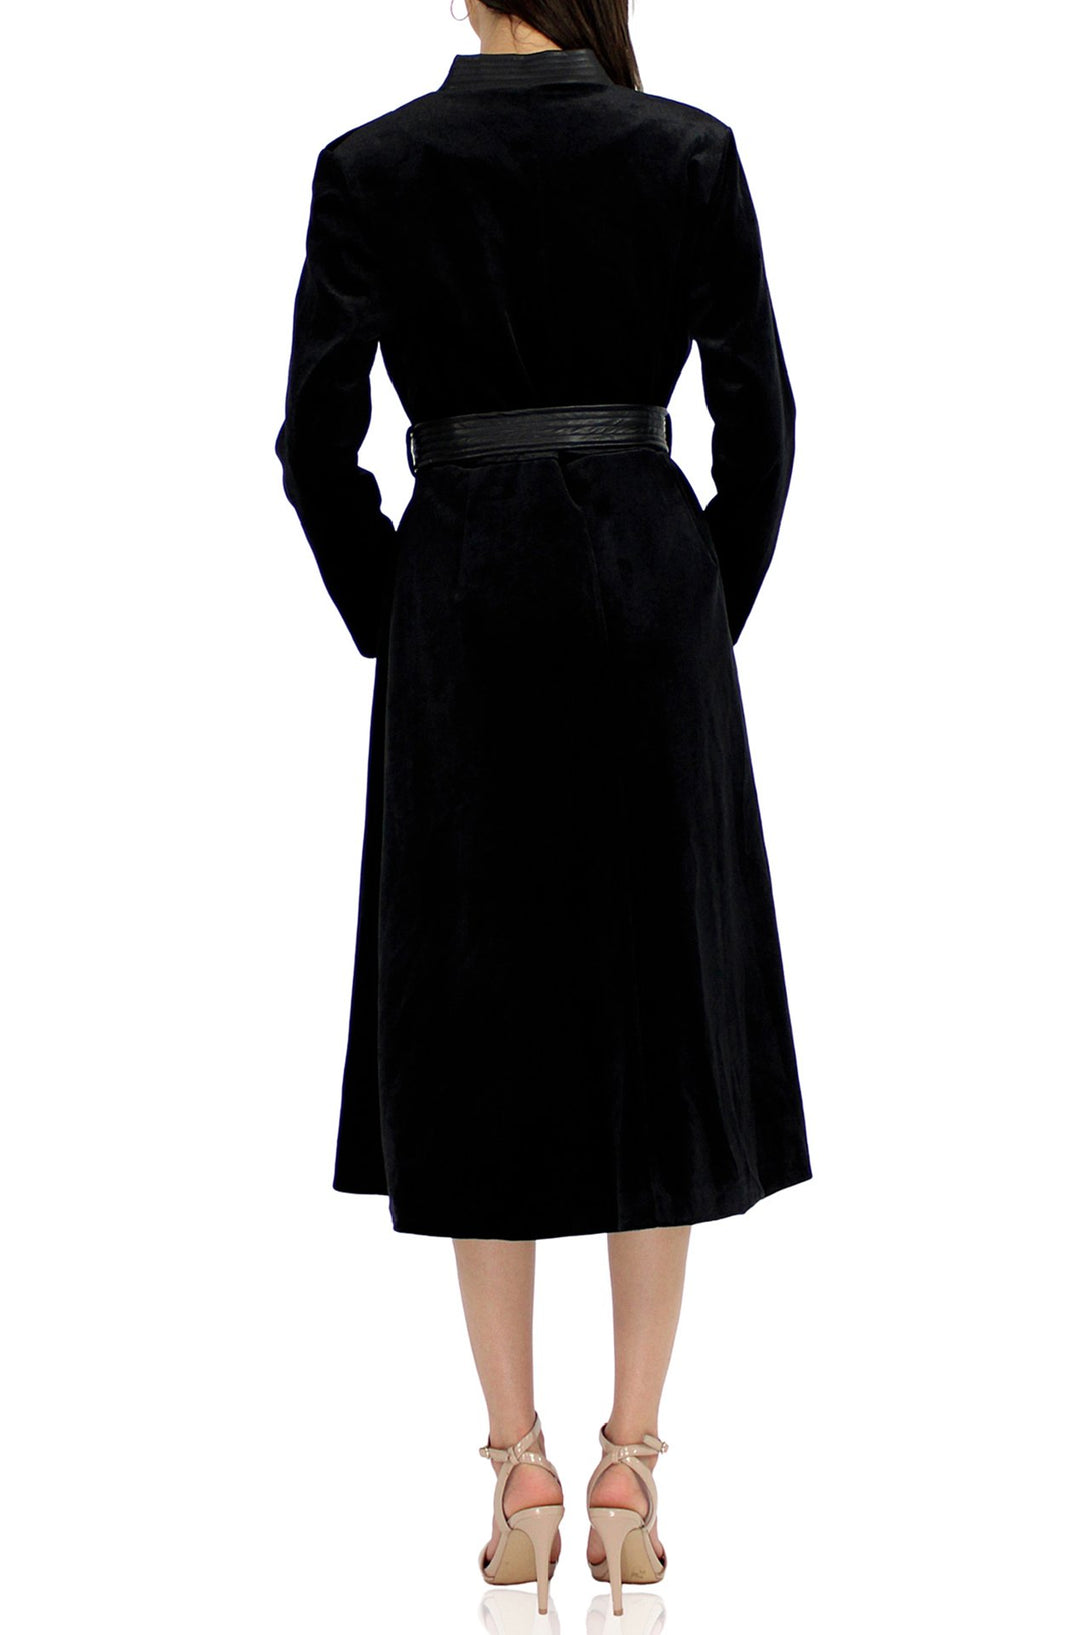 Womens-Designer-Long-Belted-Robe-By-Kyle-Richard